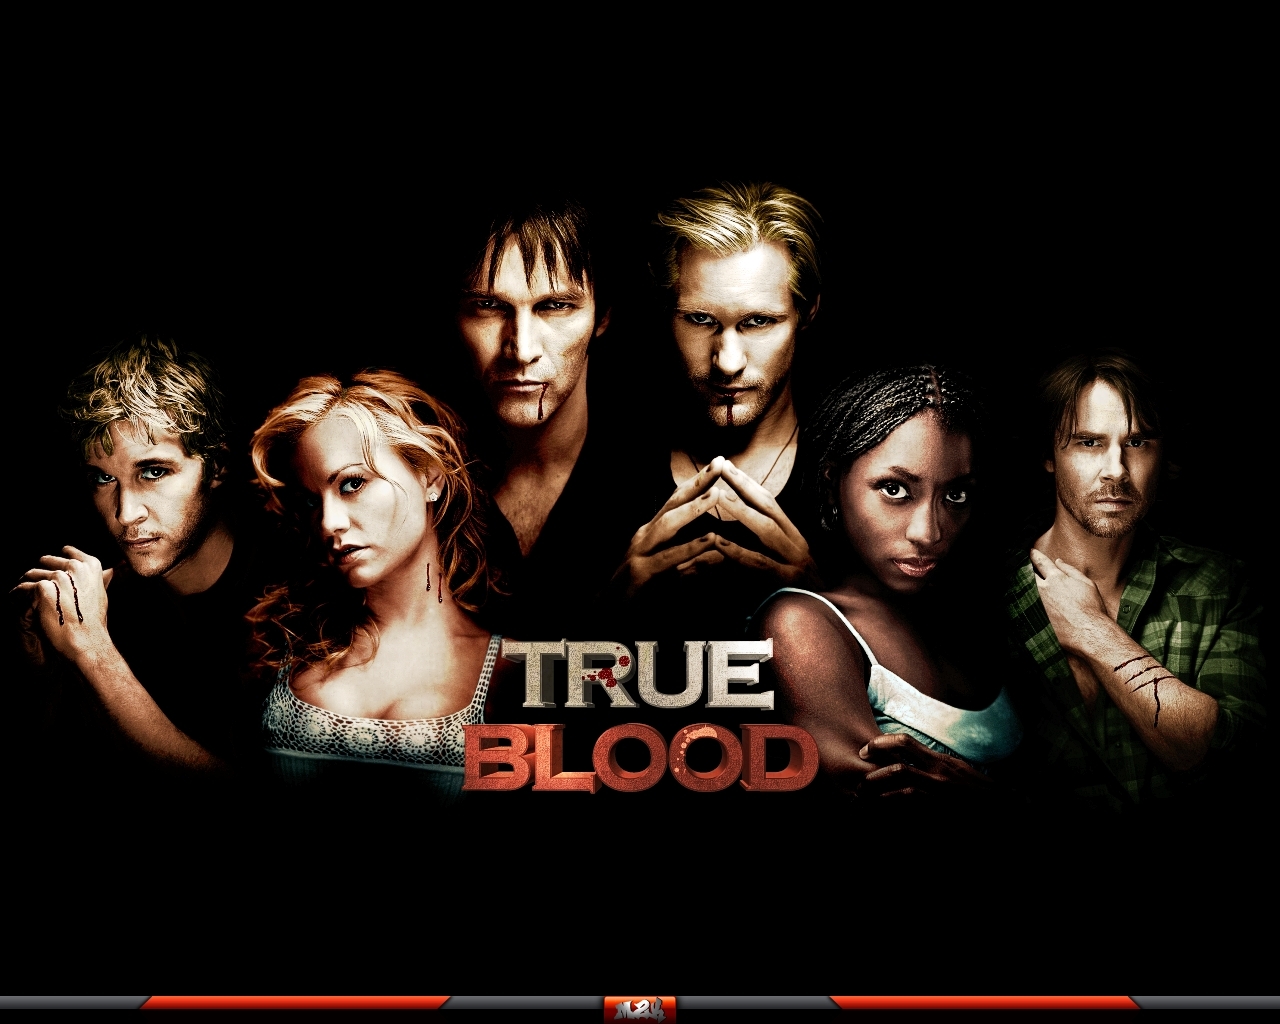 True Blood Image HD Wallpaper And Background